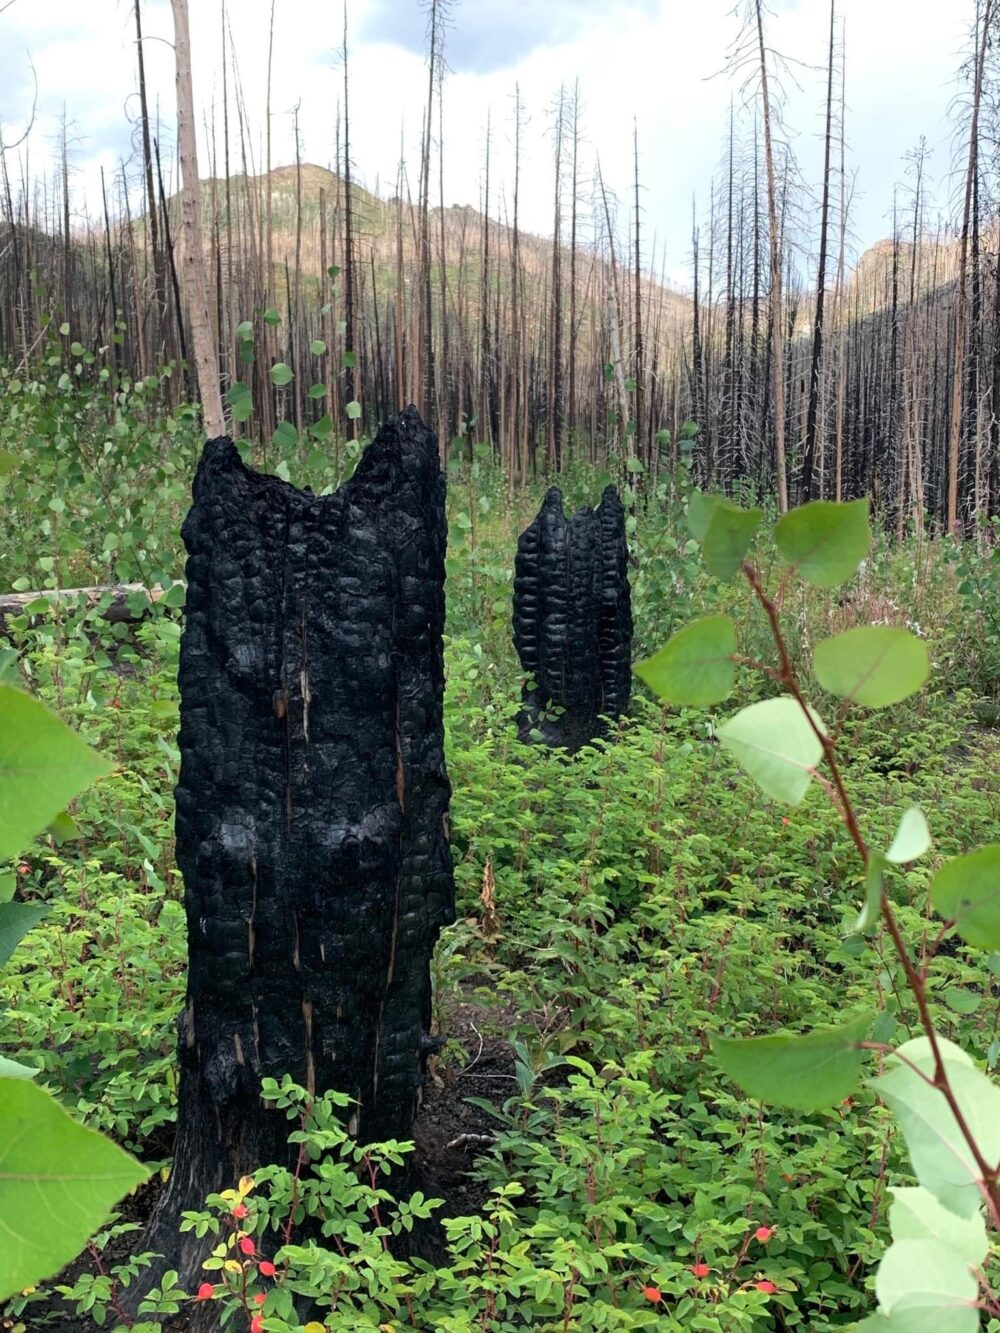 Burn area with blackened trucks and bright green undergrowth emerging